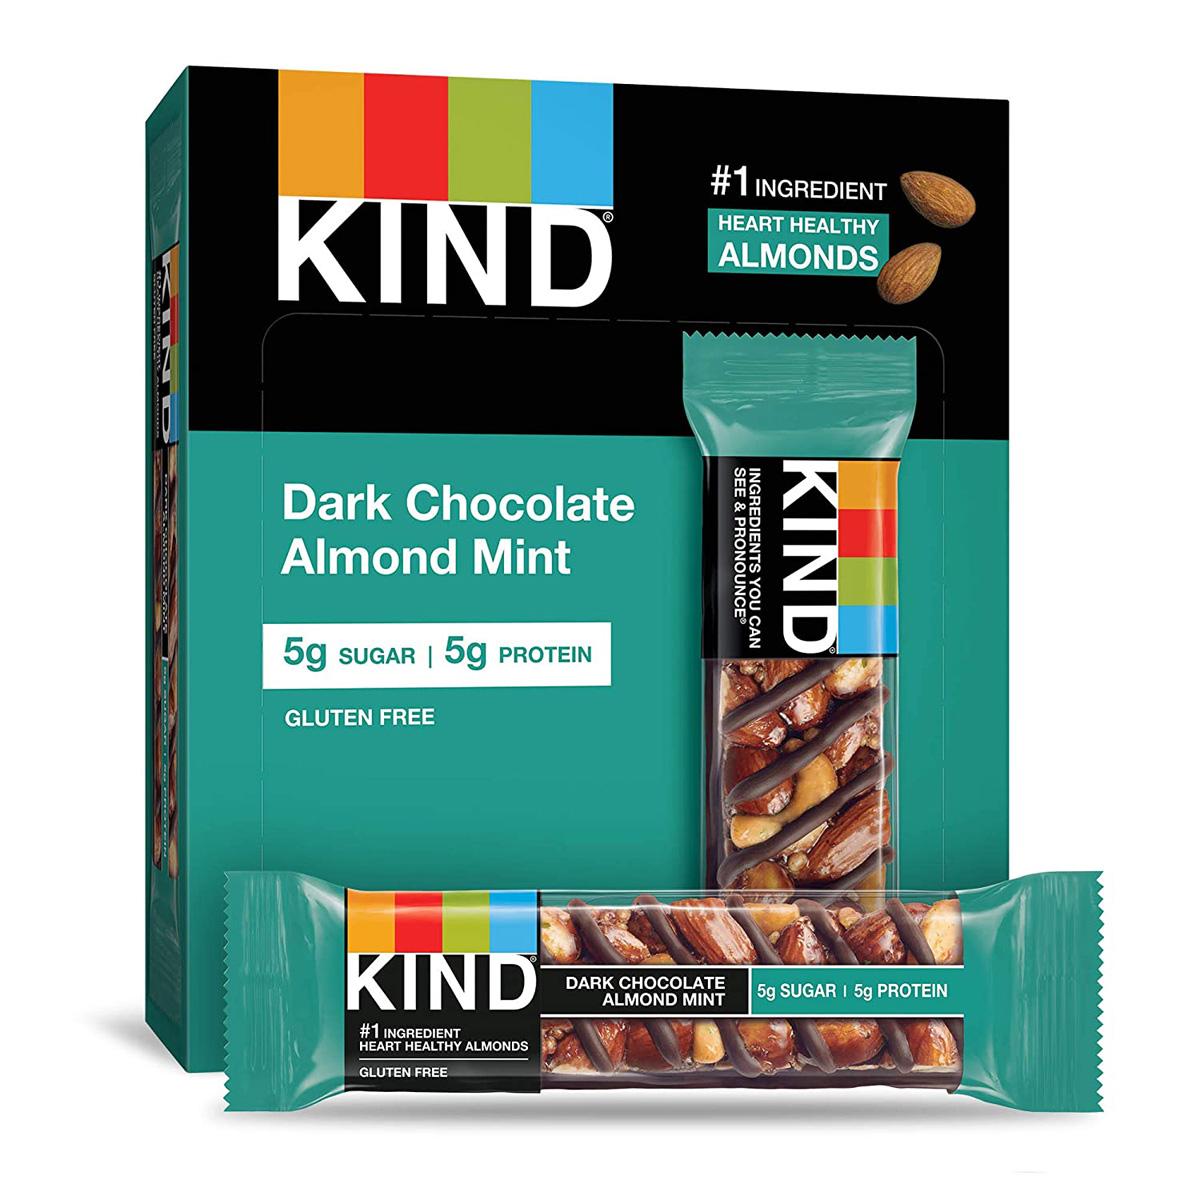 12 Kind Bars Dark Chocolate Almond Mint for $8.79 Shipped